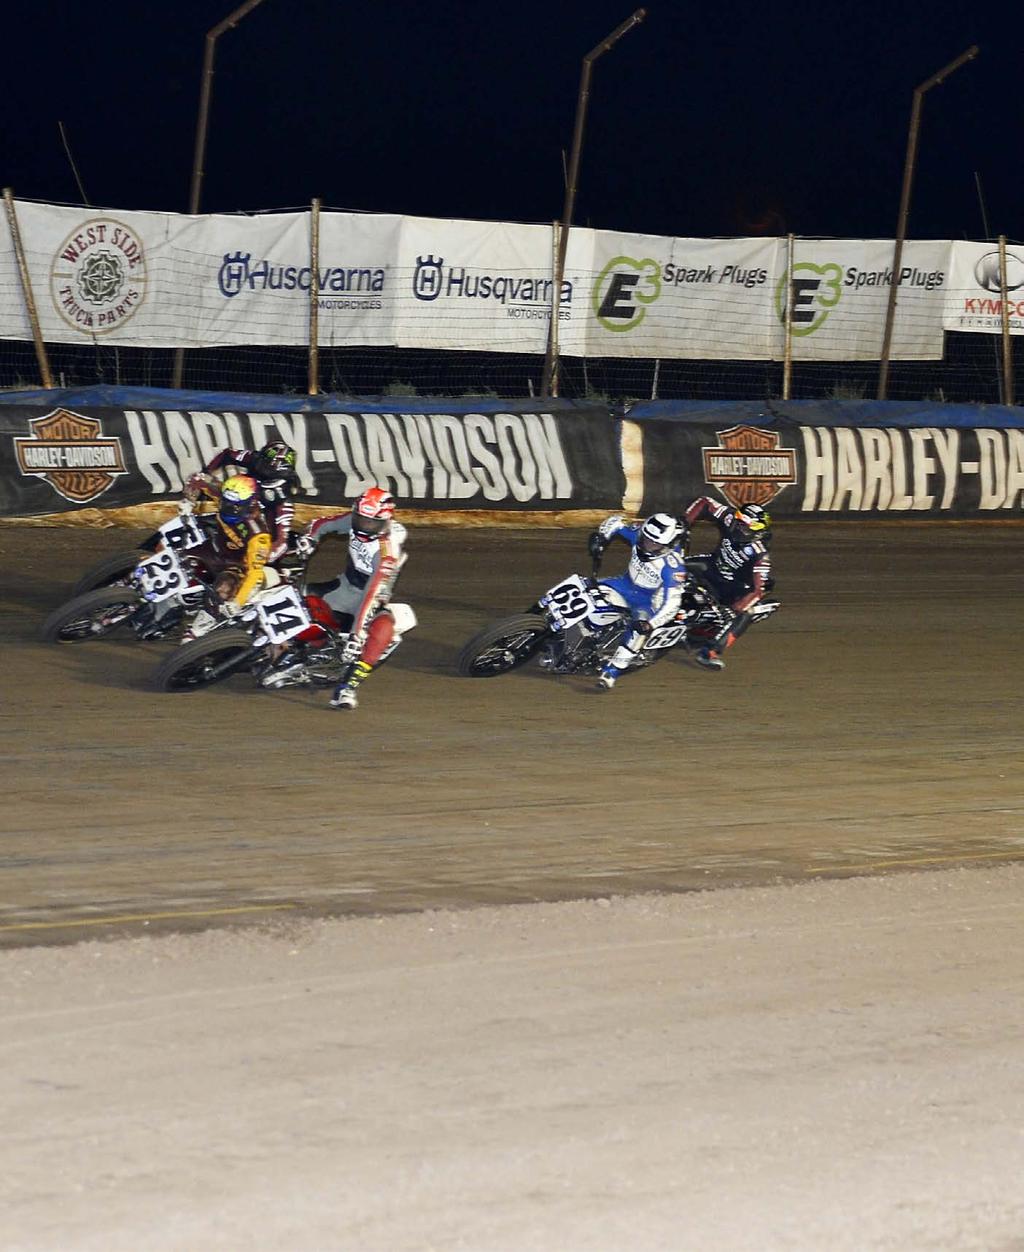 ROUND 13 / AUGUST 8, 2017 BLACK HILLS SPEEDWAY / RAPID CITY, SOUTH DAKOTA FLAT TRACK AMERICAN FLAT TRACK CHAMPIONSHIP P98 STORY AND PHOTOGRAPHY BY DAVE HOENIG / FLAT TRAK FOTOS The American Flat